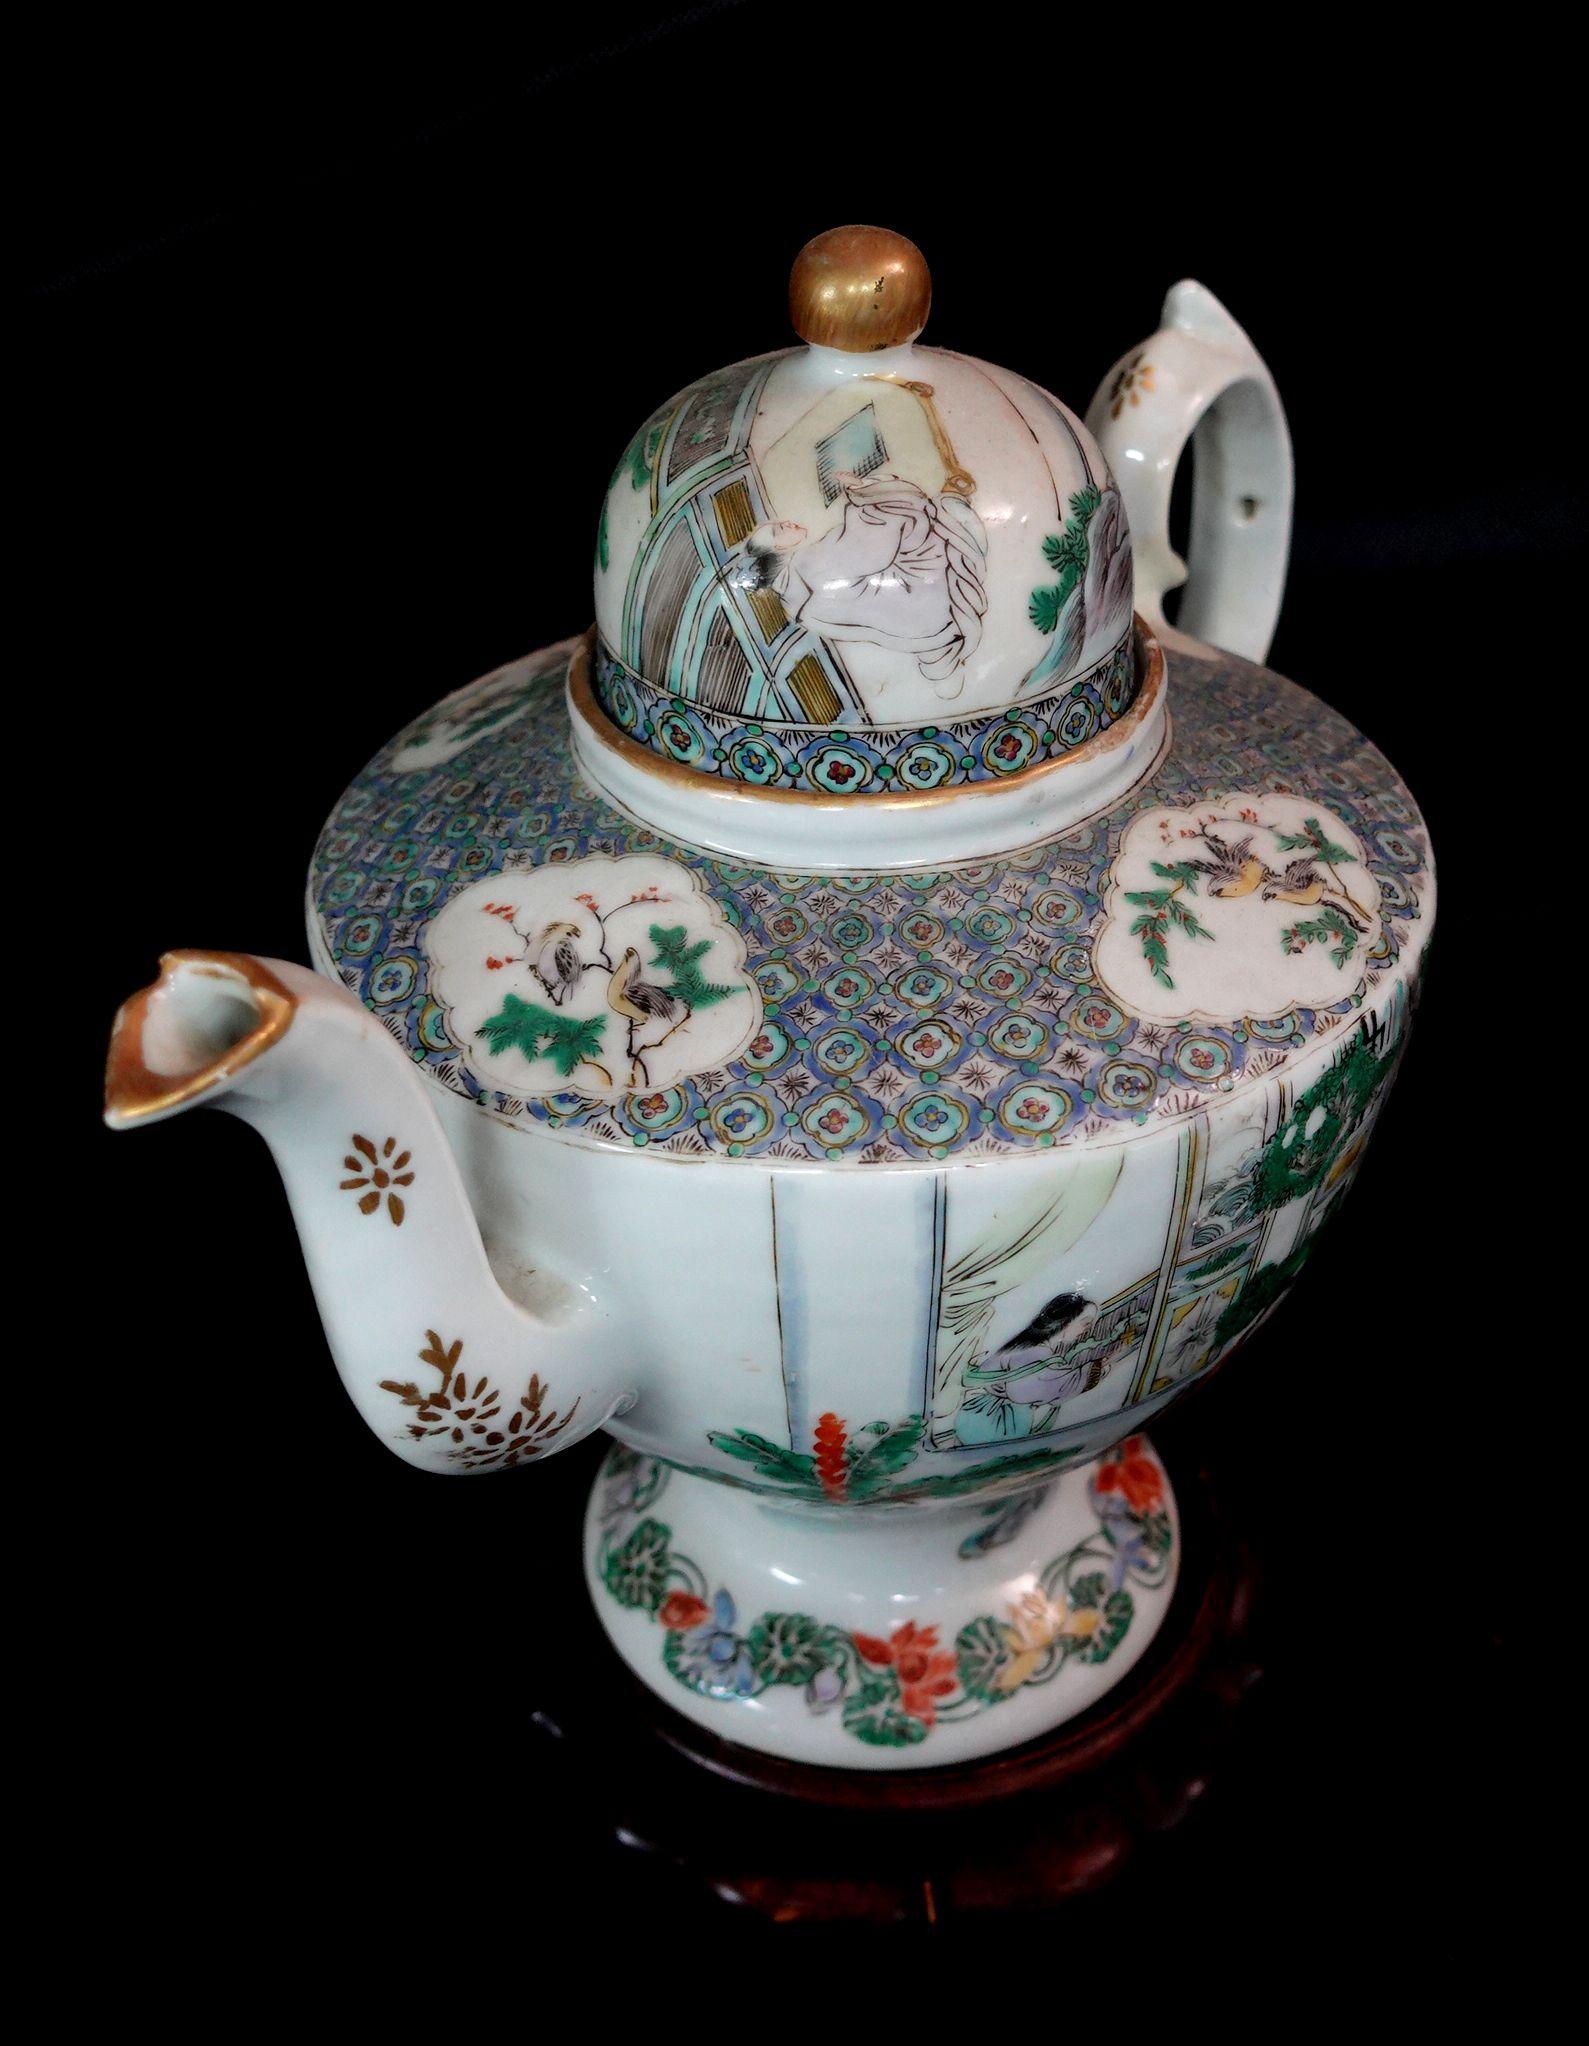 Antique Chinese Famille Rose Porcelain Teapot, early 19th Century For Sale 4